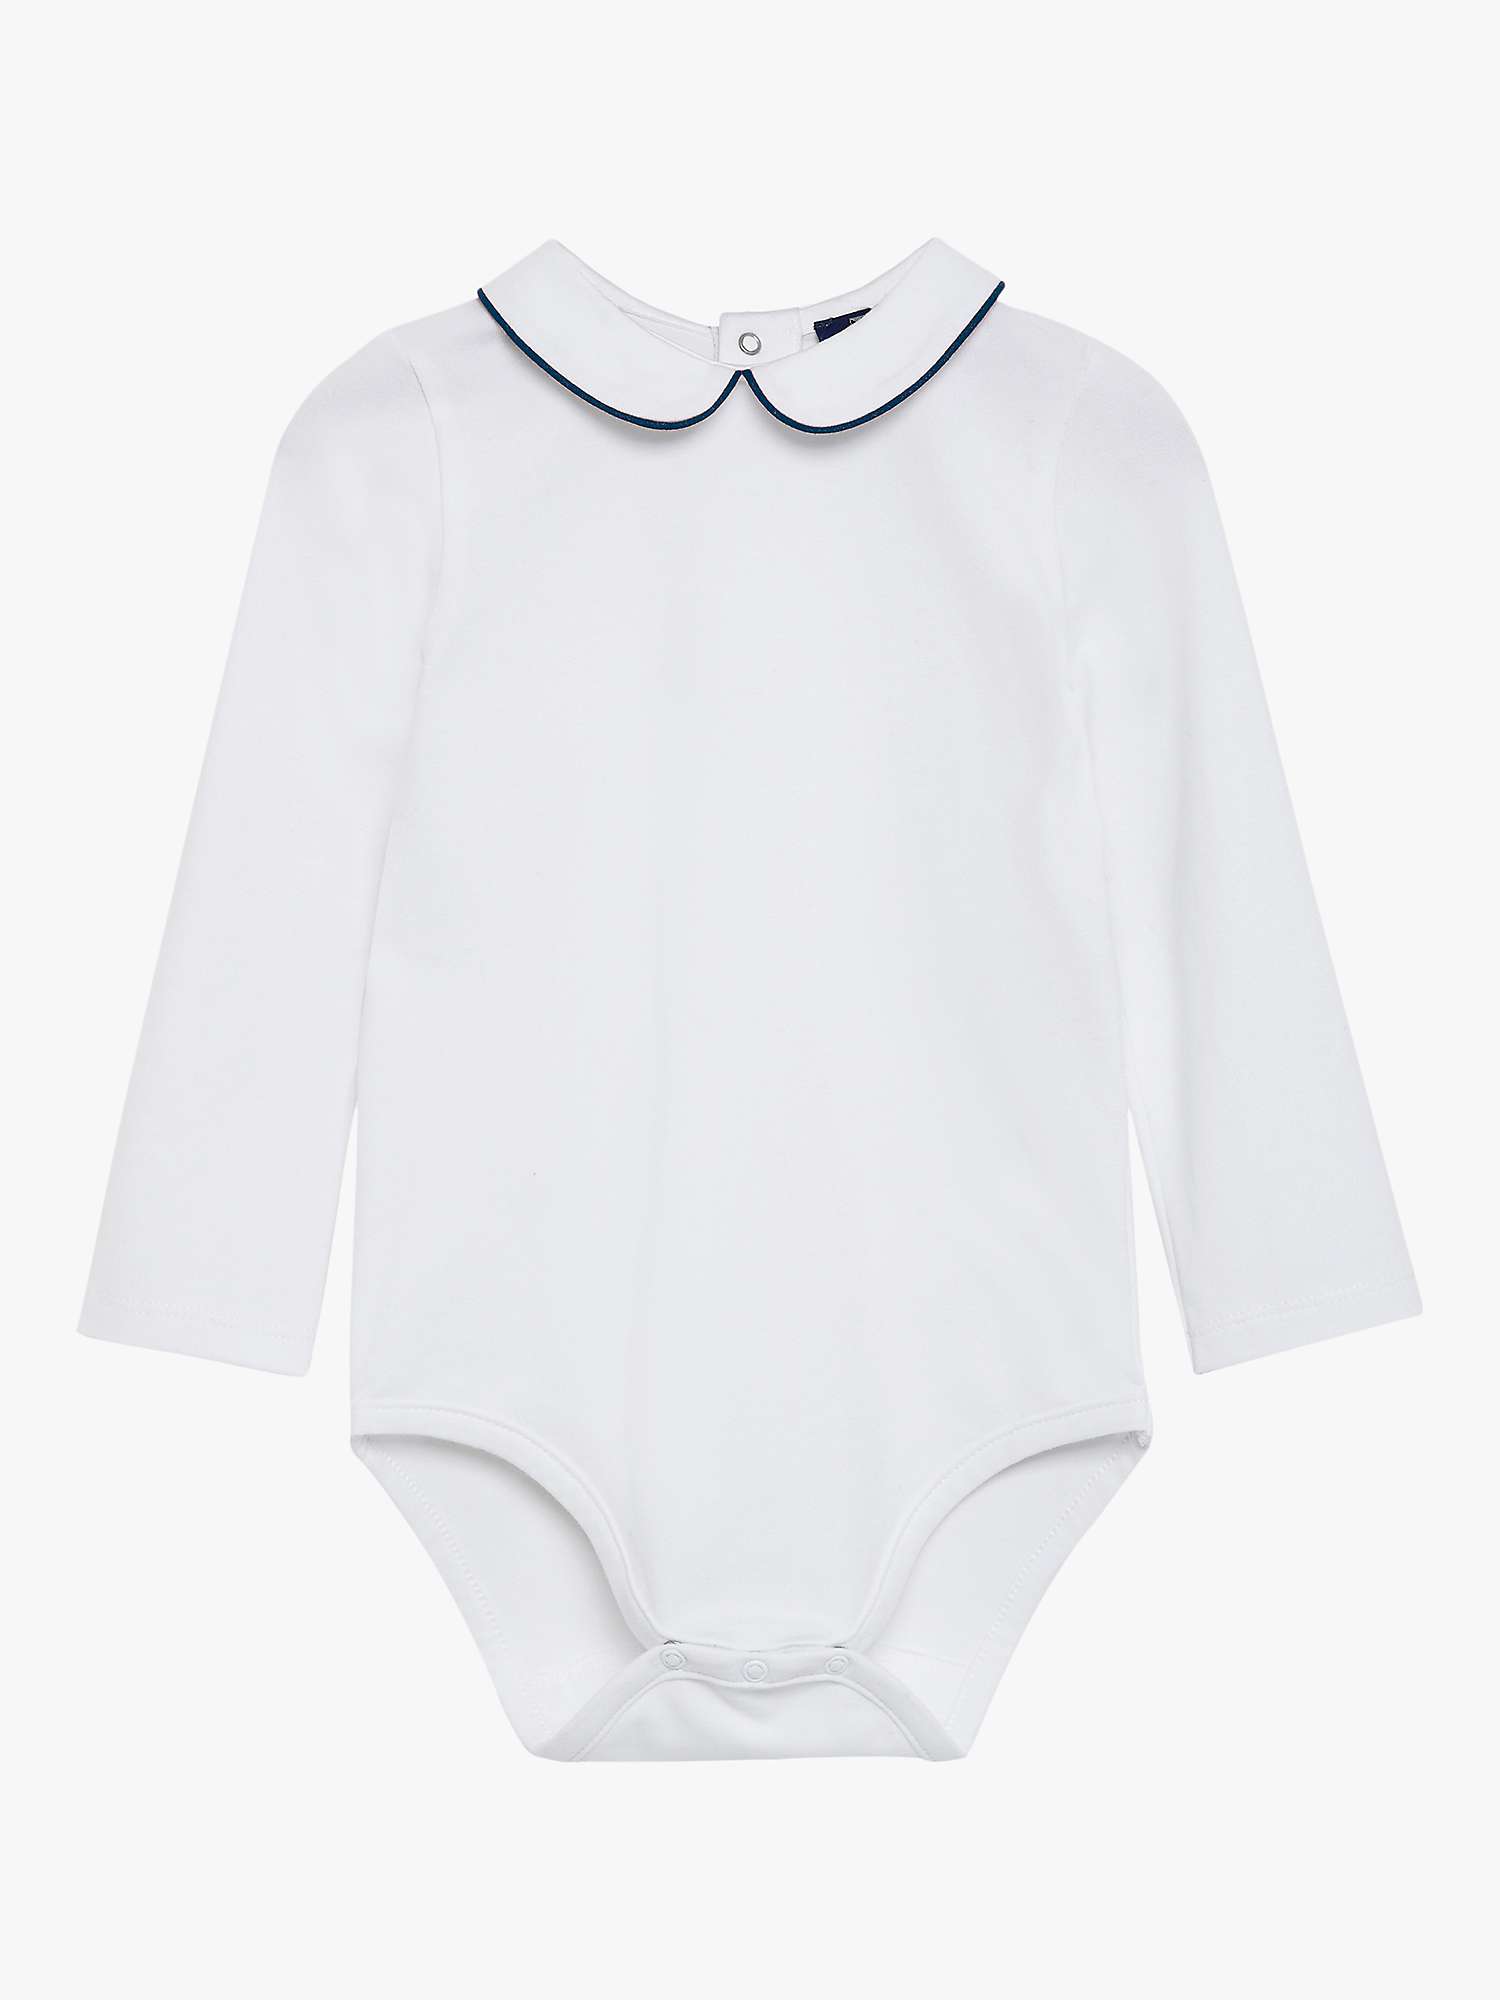 Buy Trotters Thomas Brown Baby Milo Jersey Bodysuit, White/Navy Online at johnlewis.com